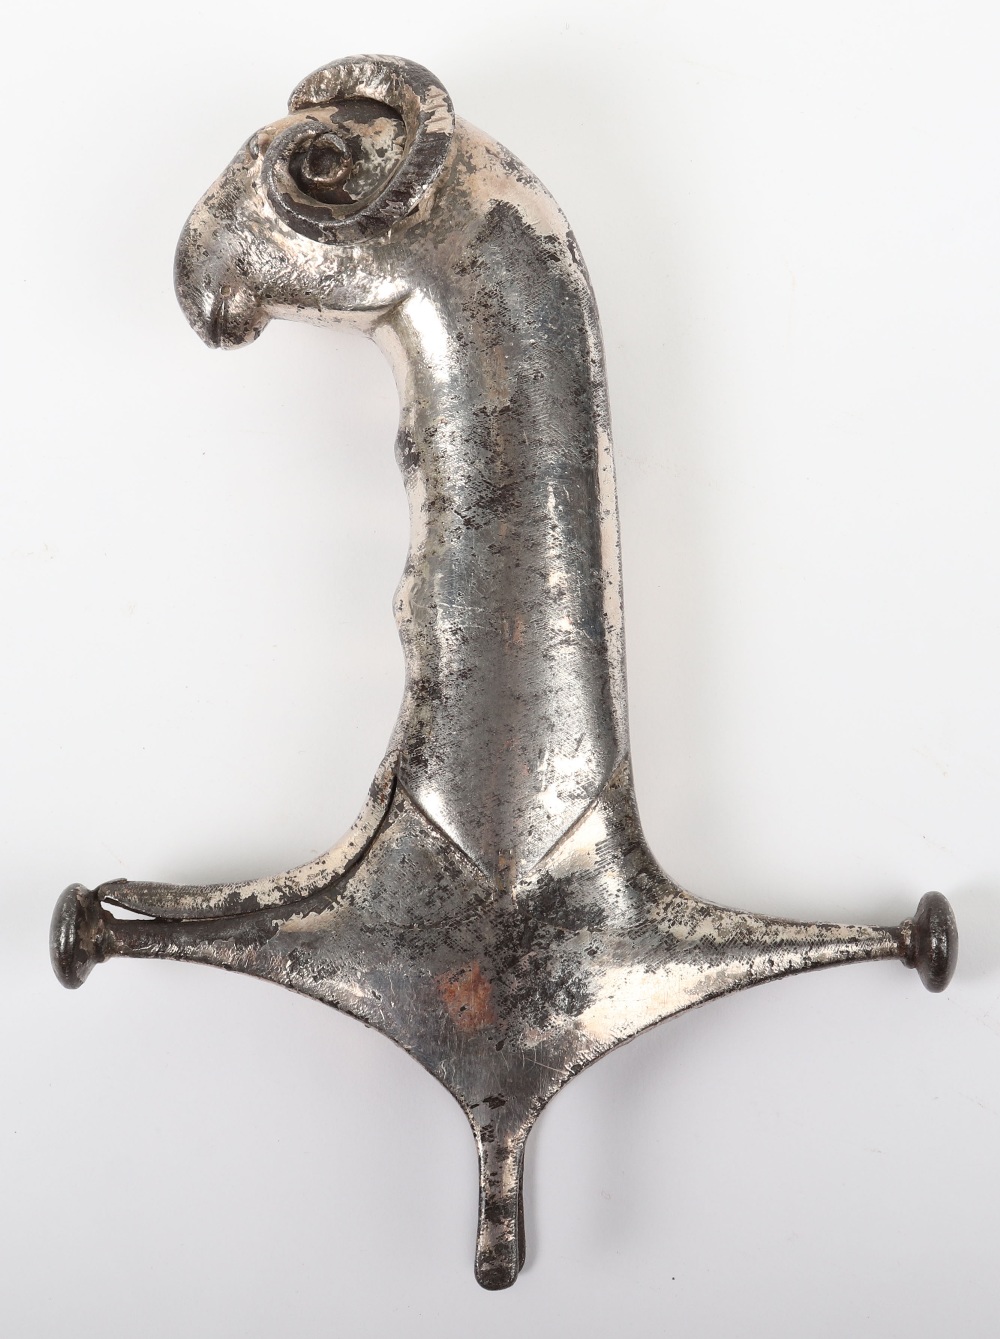 Large 18th or 19th Century Indian Iron Sword Hilt